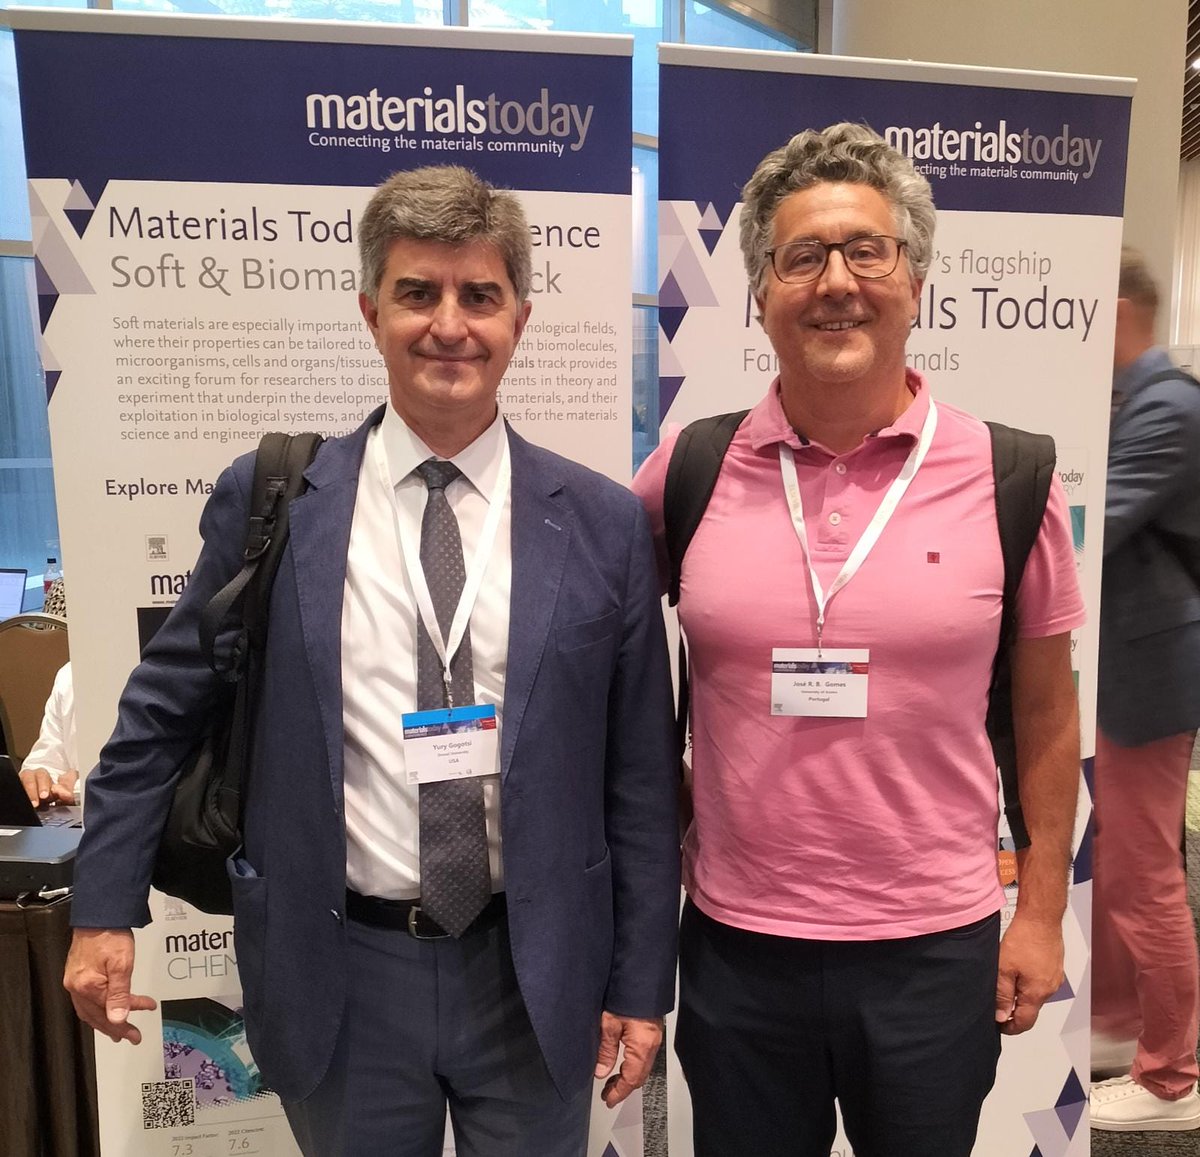 I am very pleased for having met Professor @gogotsi1 and grateful for his very inspiring opening plenary lecture about #MXenes at the Materials Today Conference.